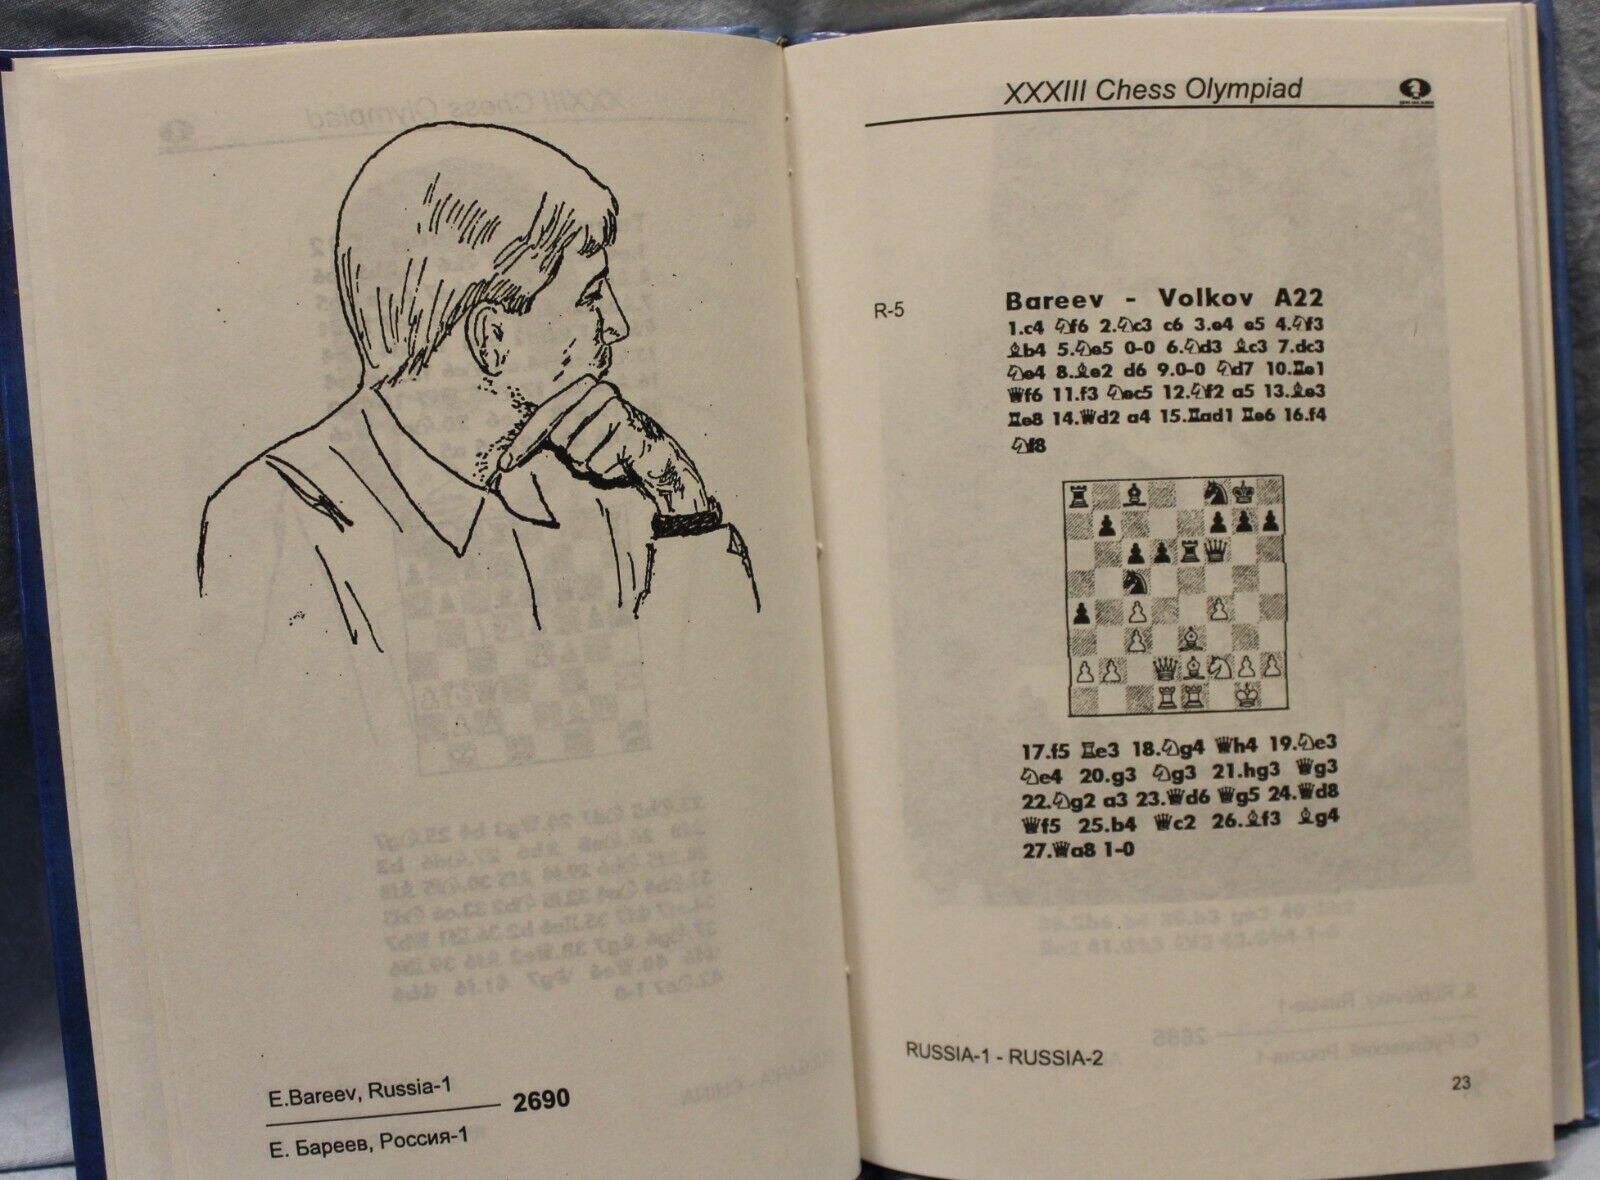 11004.Chess Book in English and Russian. 33 Chess Olympiad. Elista, Papuev Victor 1999